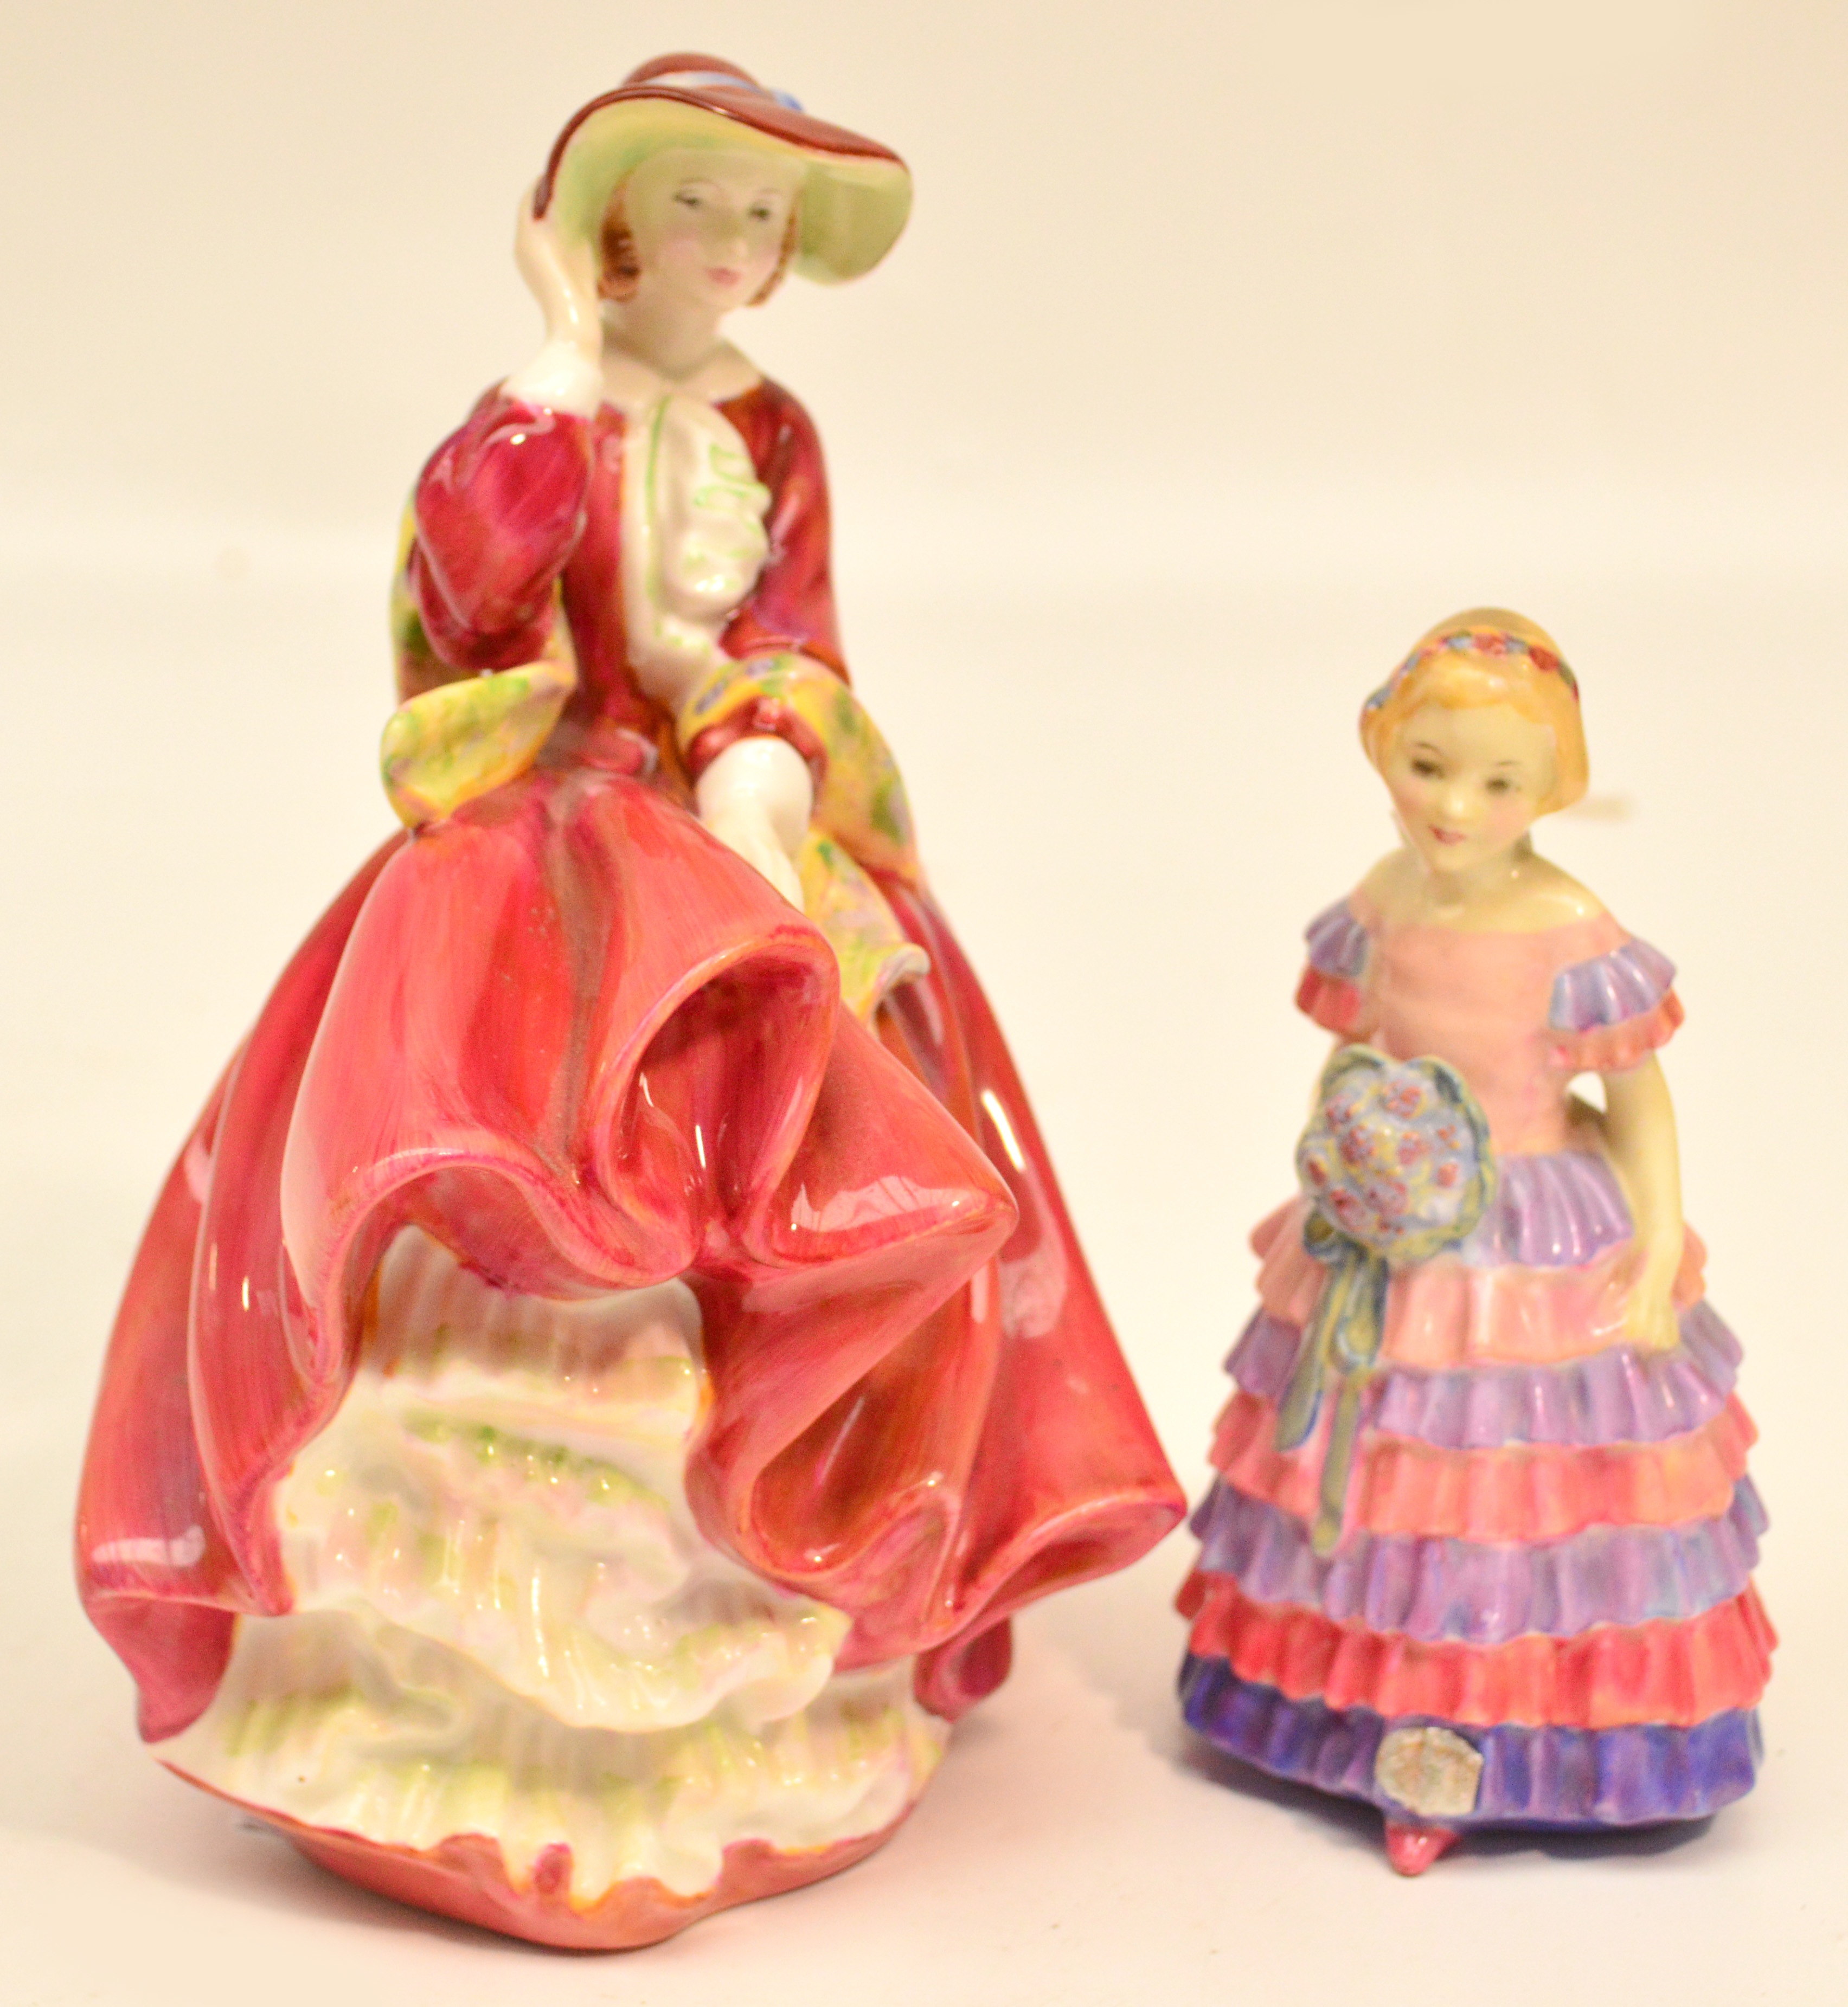 Two Royal Doulton figurines HN1433 "The Little Bridesmaid" and HN1834 "Top O' The Hill". CONDITION